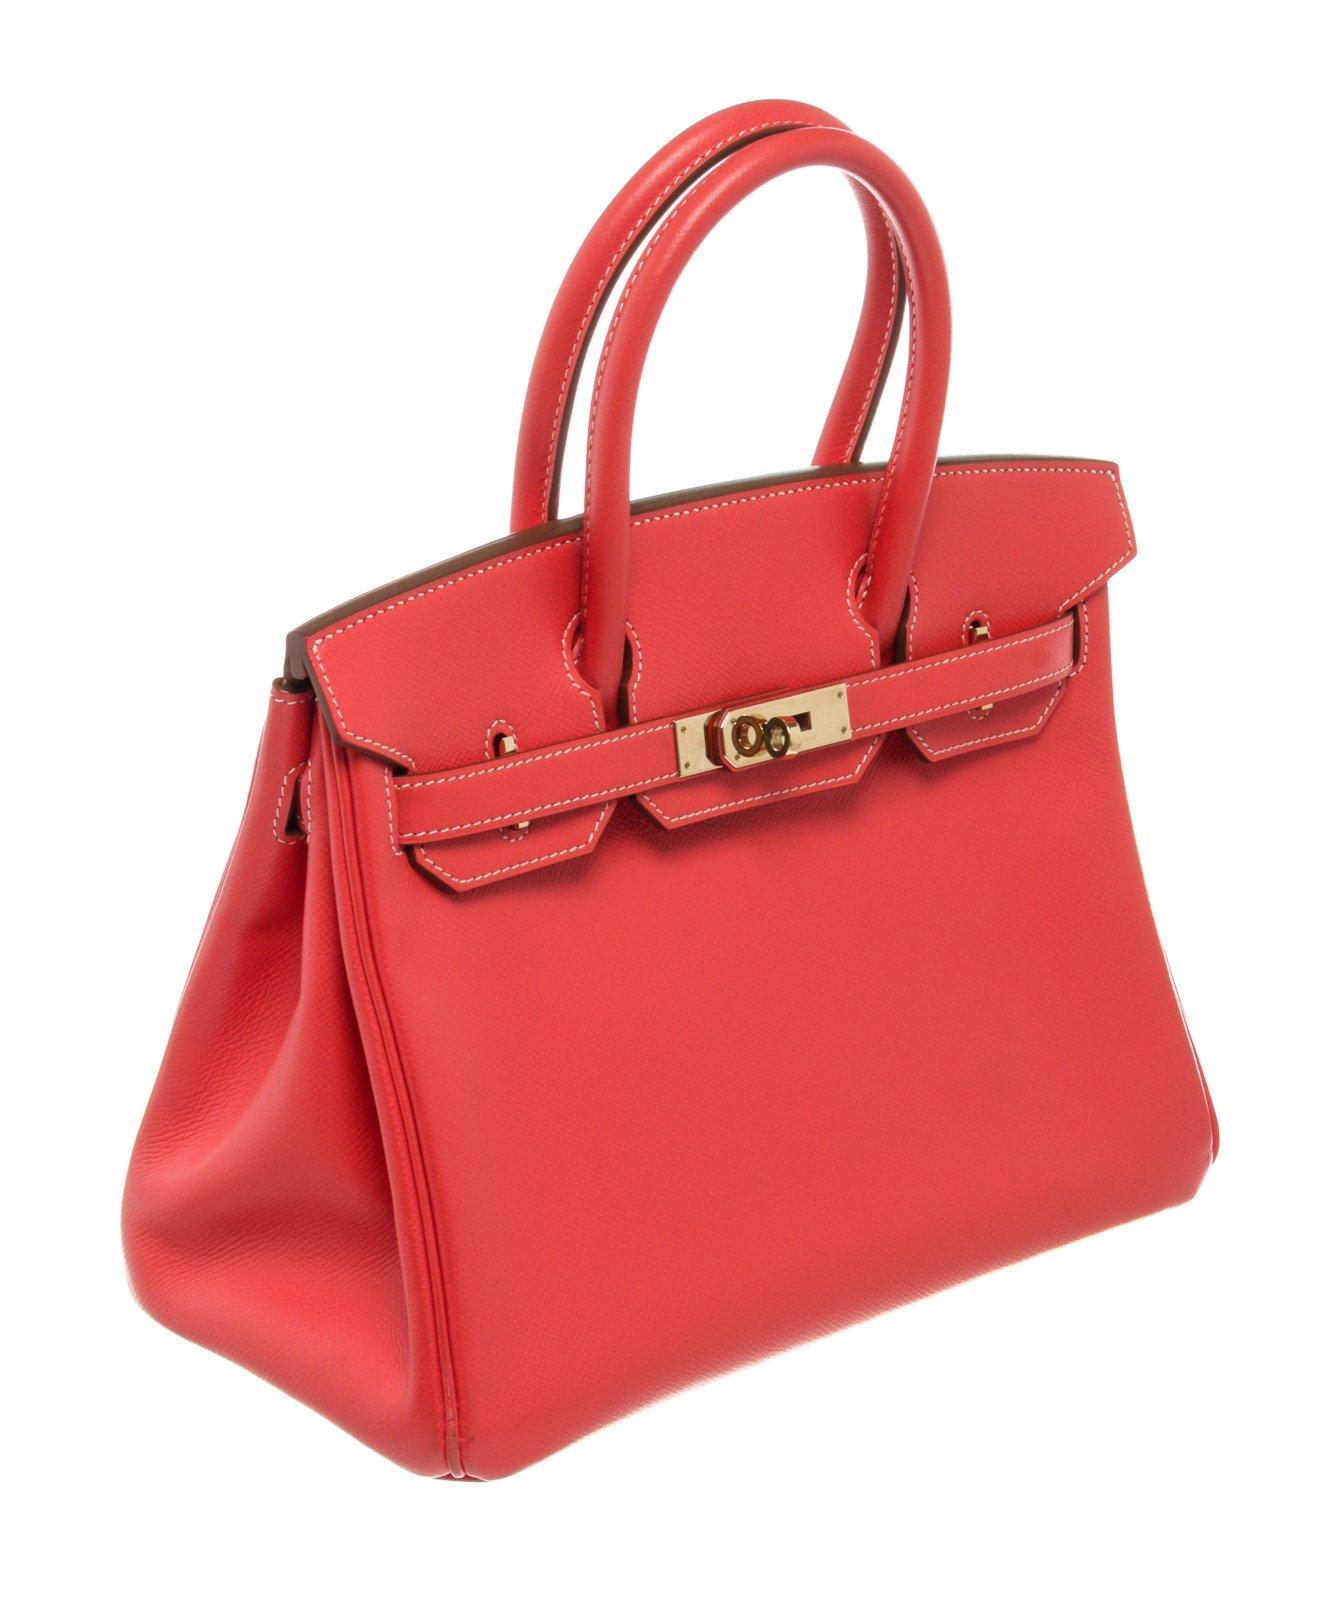 Hermes Red Leather Birkin 30cm Satchel Bag with leather, gold-tone hardware, trim leather, interior slip pocket, lining leather, dual top handle and turn lock closure.

52817MSC